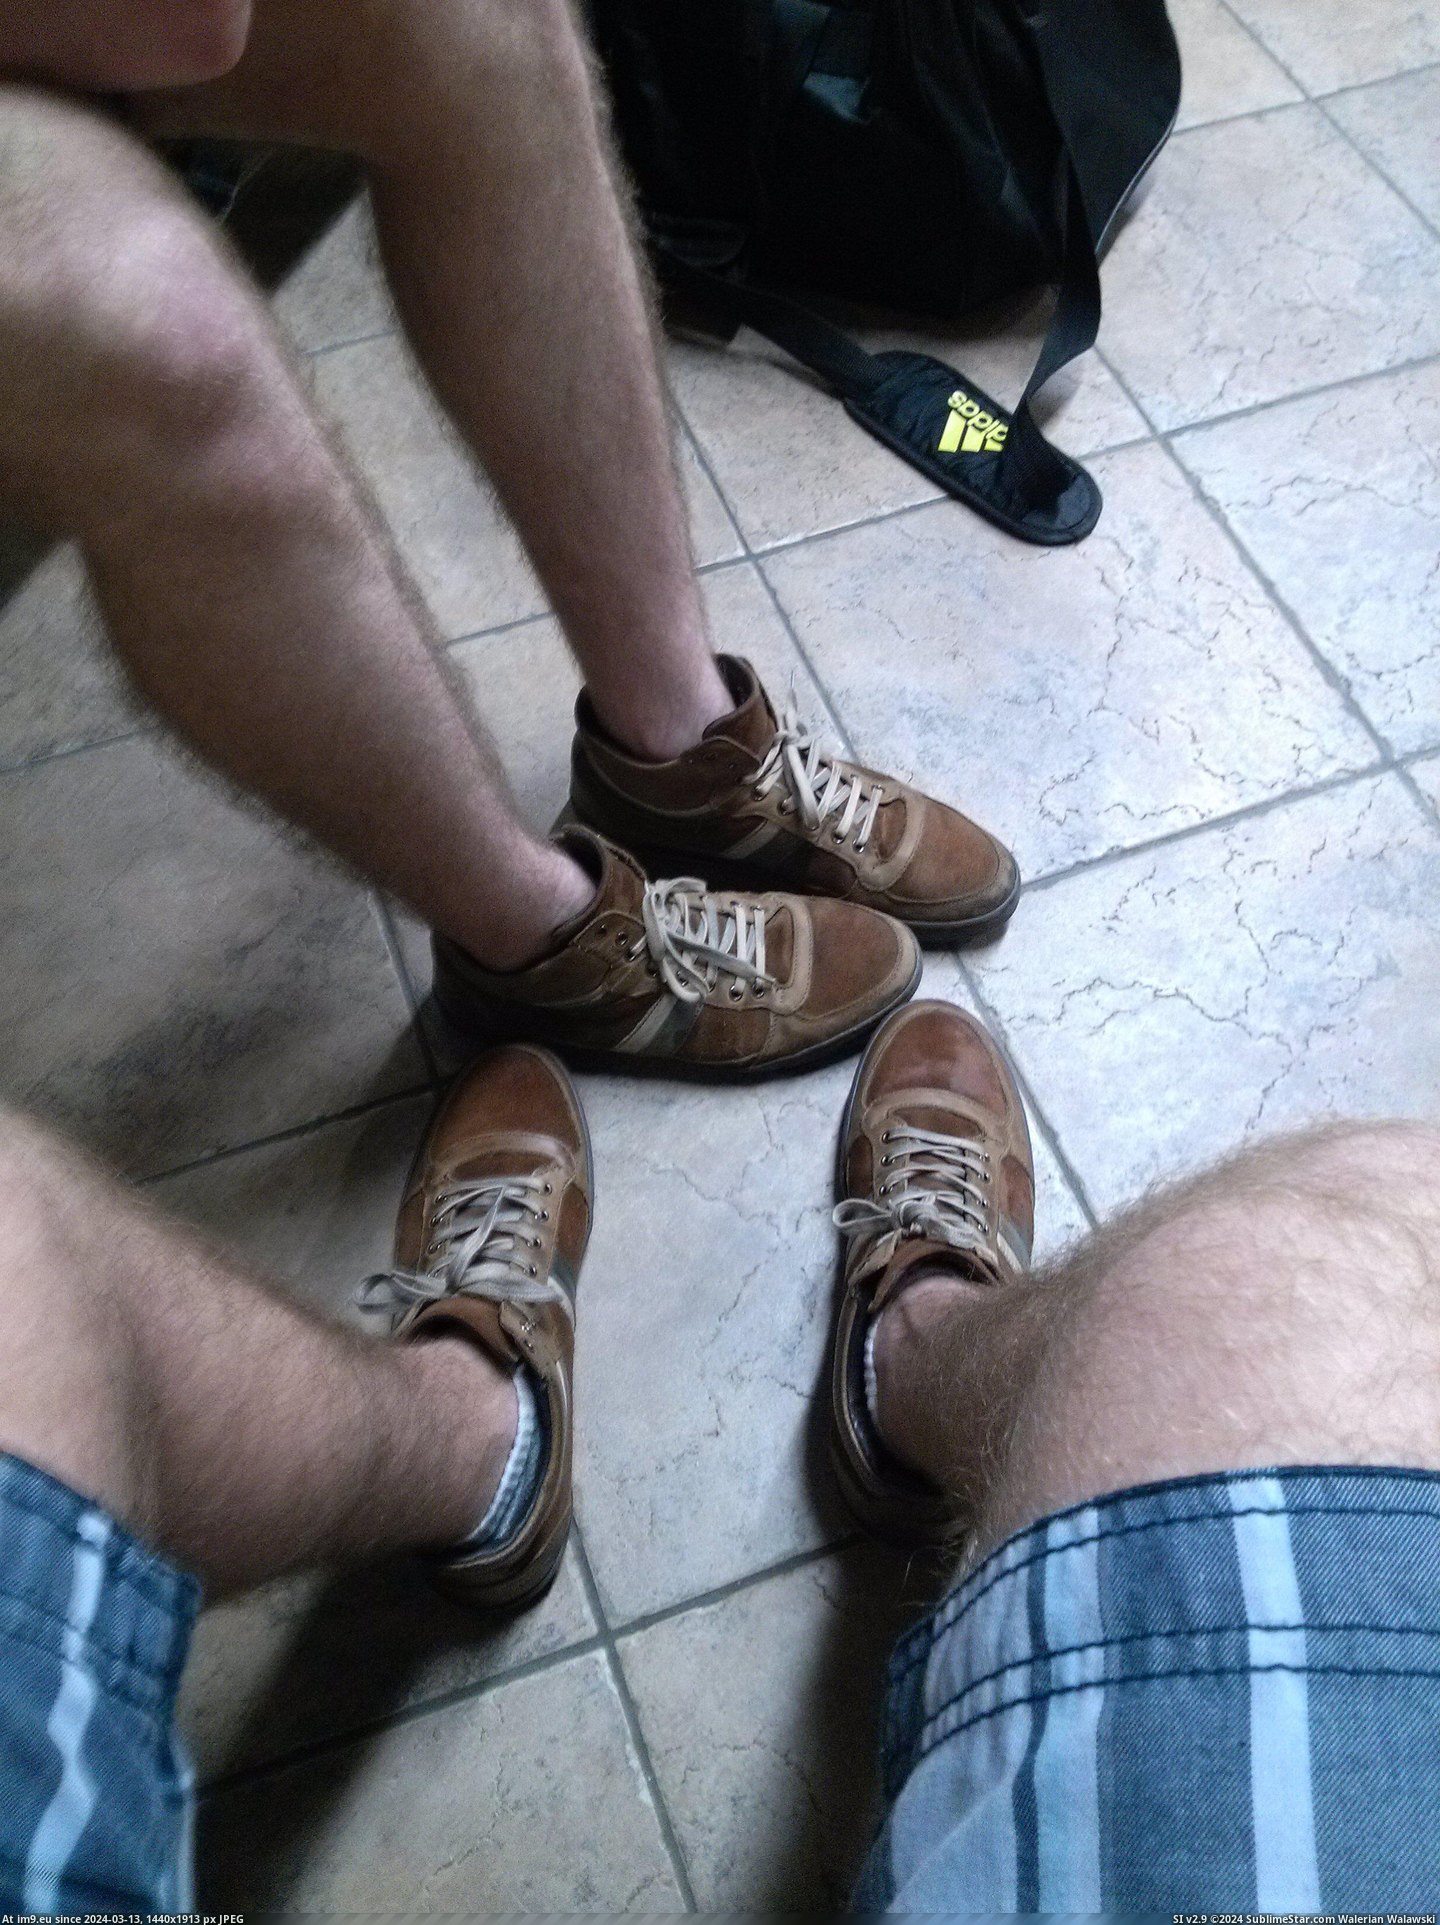 #Did #Bought #Country #Identical #Kno #Twin #Lives #Shoes [Mildlyinteresting] My identical twin who lives in a different country, bought the same shoes as I did. Without either of us kno Pic. (Изображение из альбом My r/MILDLYINTERESTING favs))